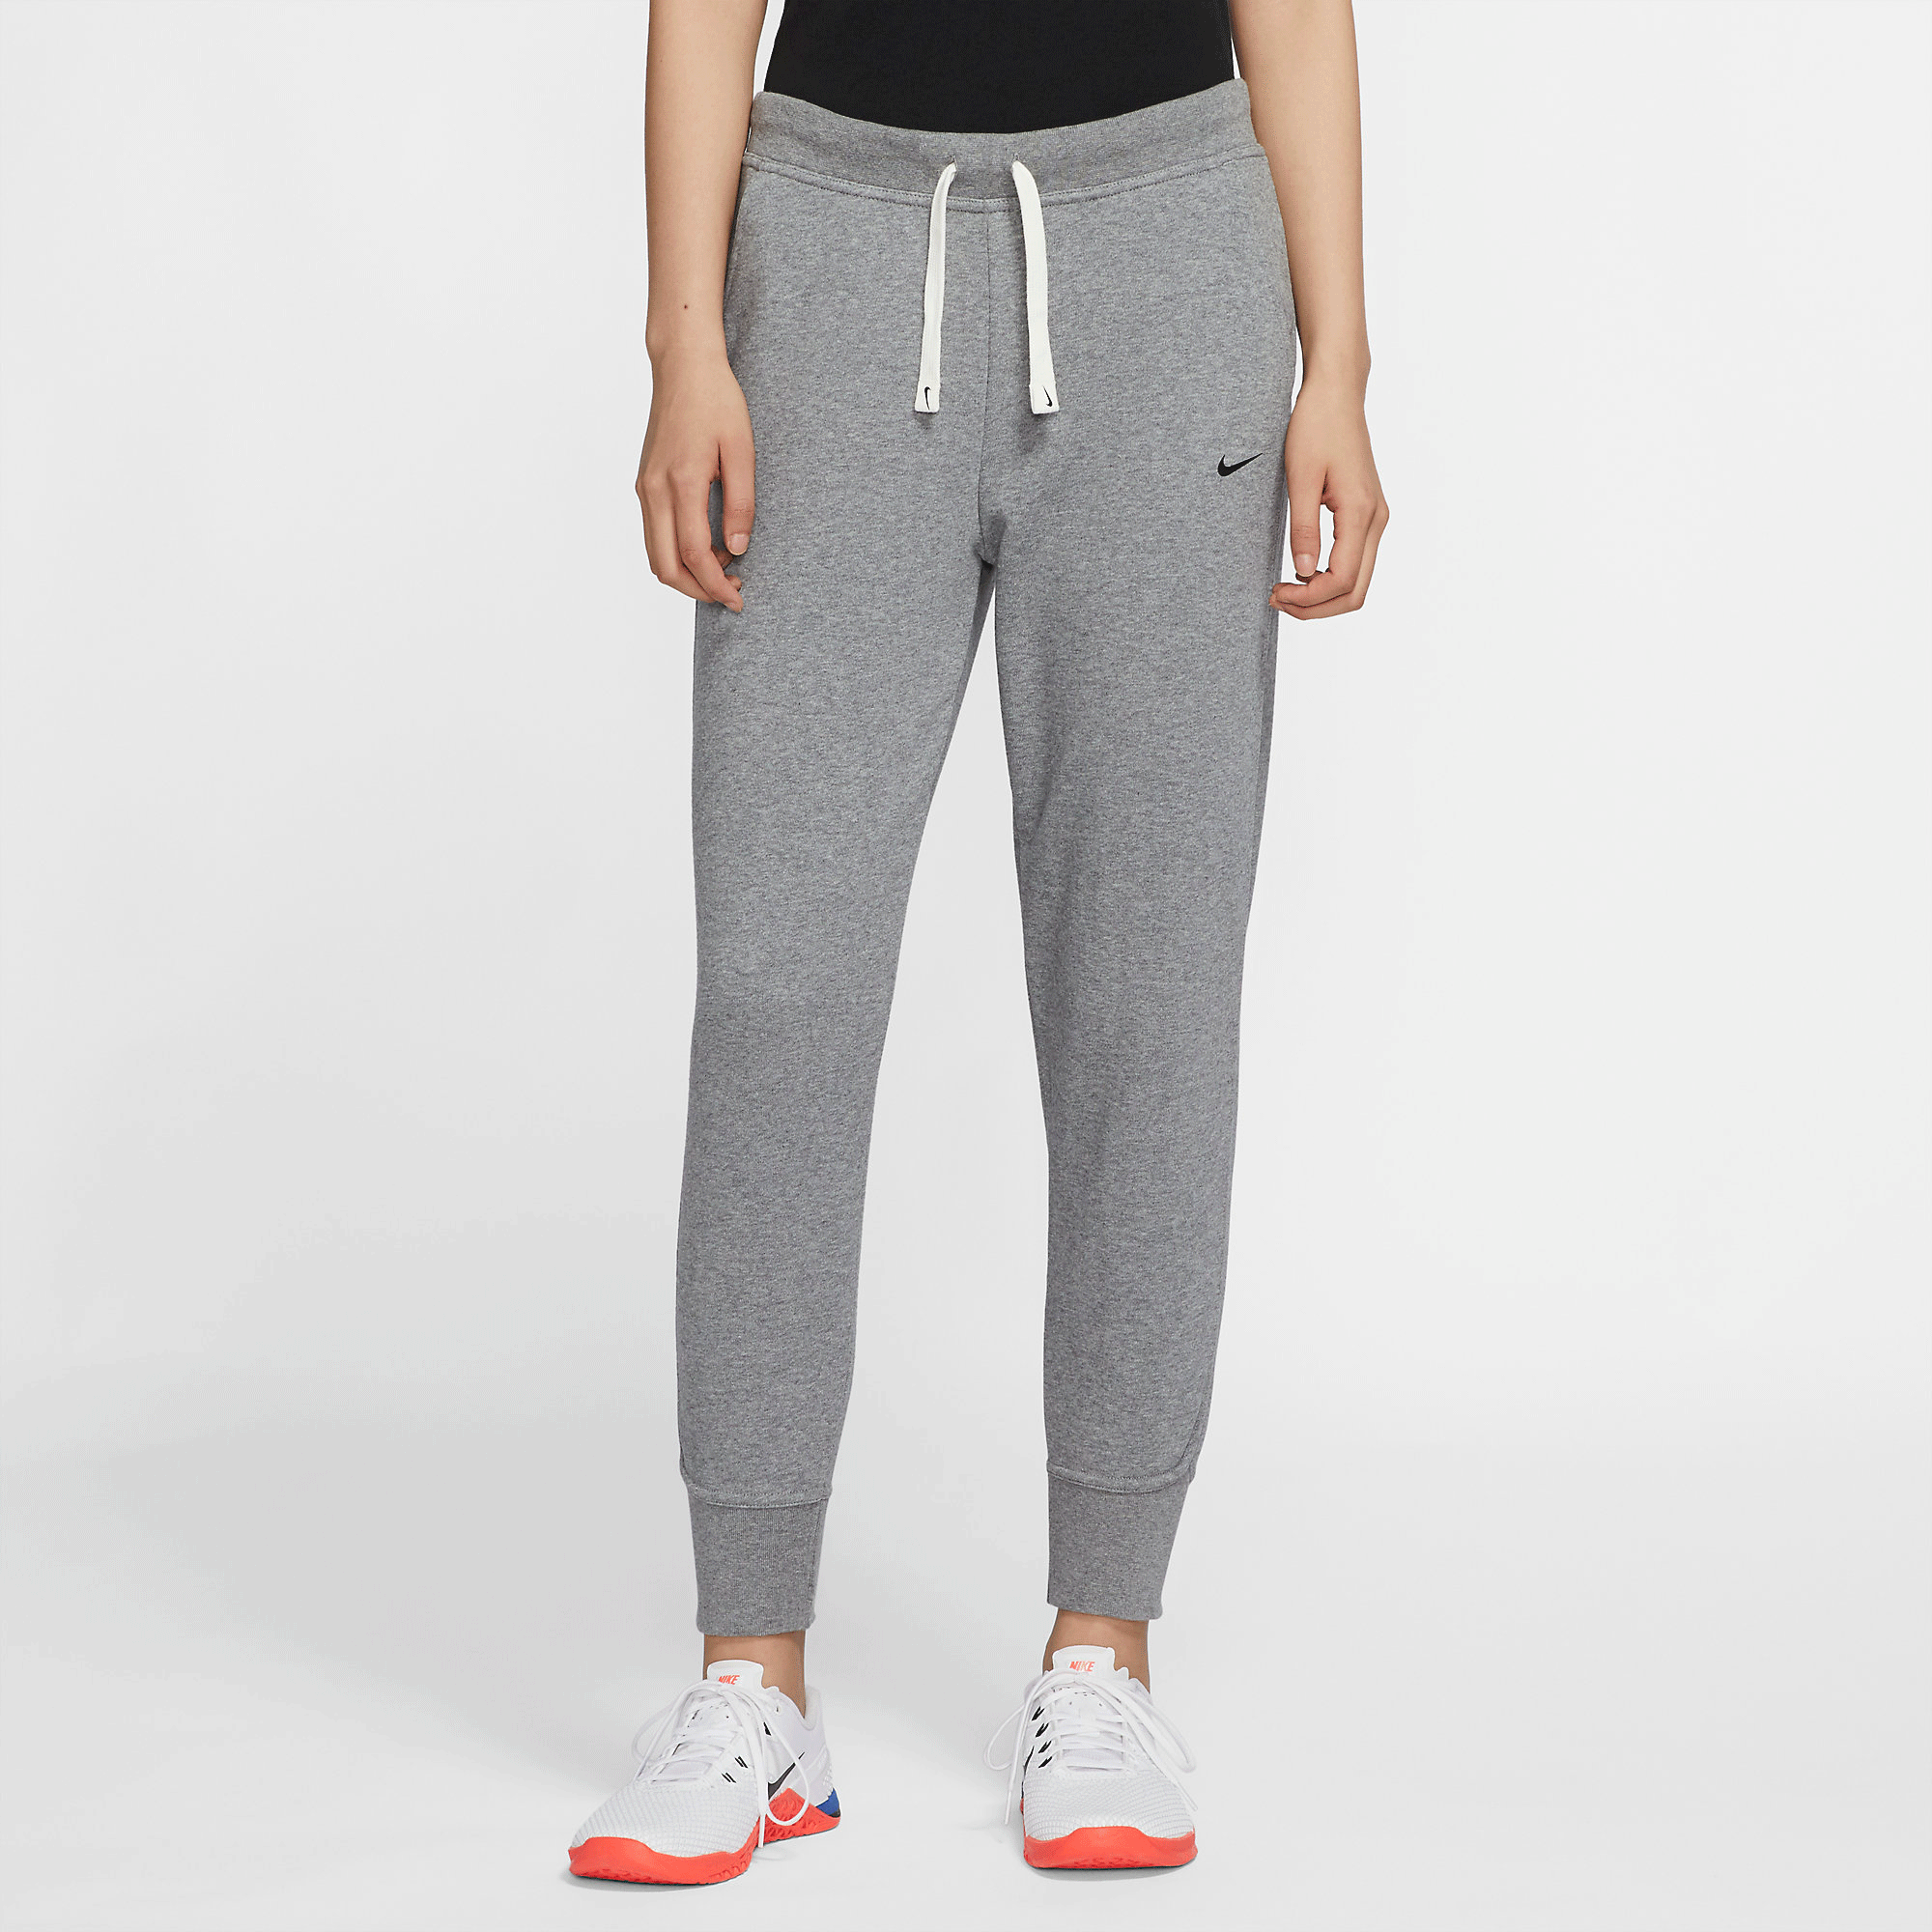 Nike Womens Dri-FIT Get Fit Training Pants - Carbon Heather ...